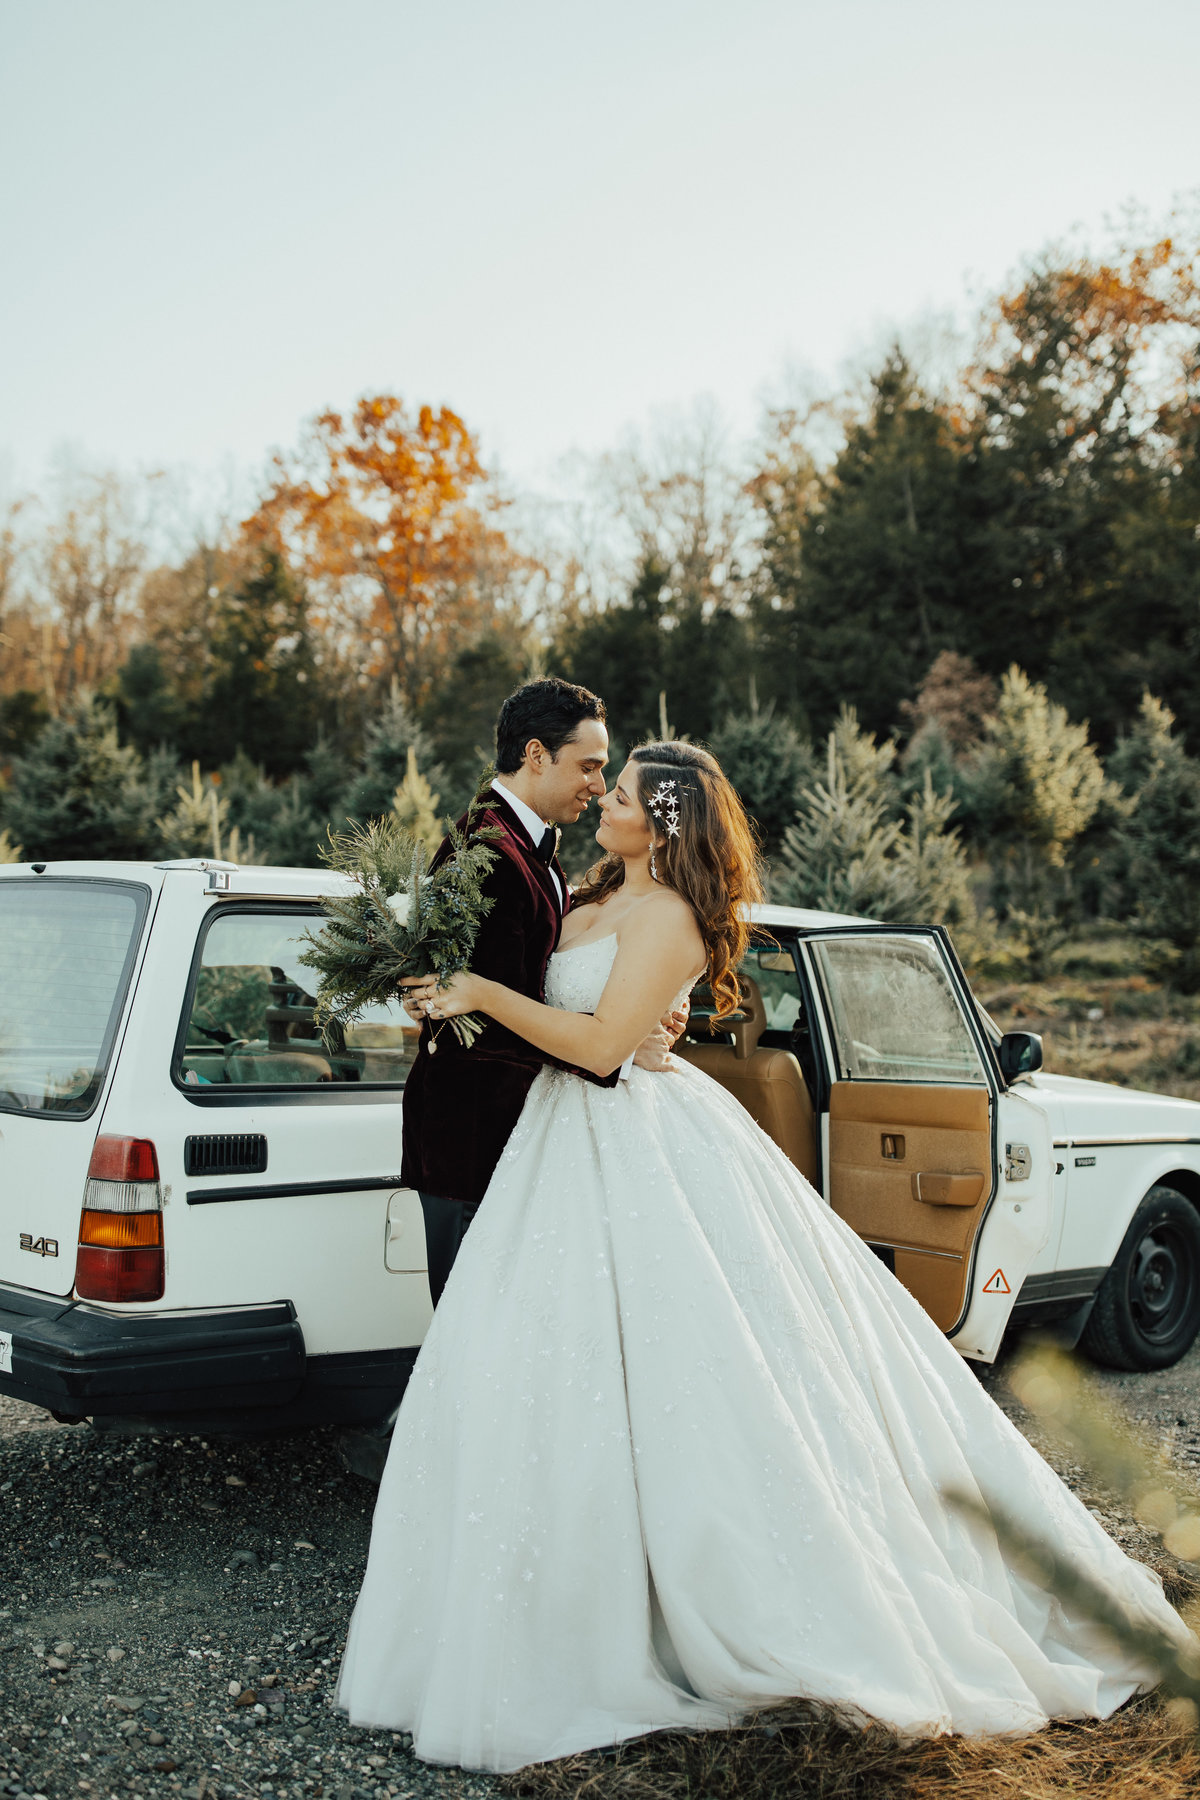 Christy-l-Johnston-Photography-Monica-Relyea-Events-Noelle-Downing-Instagram-Noelle_s-Favorite-Day-Wedding-Battenfelds-Christmas-tree-farm-Red-Hook-New-York-Hudson-Valley-upstate-november-2019-AP1A7817